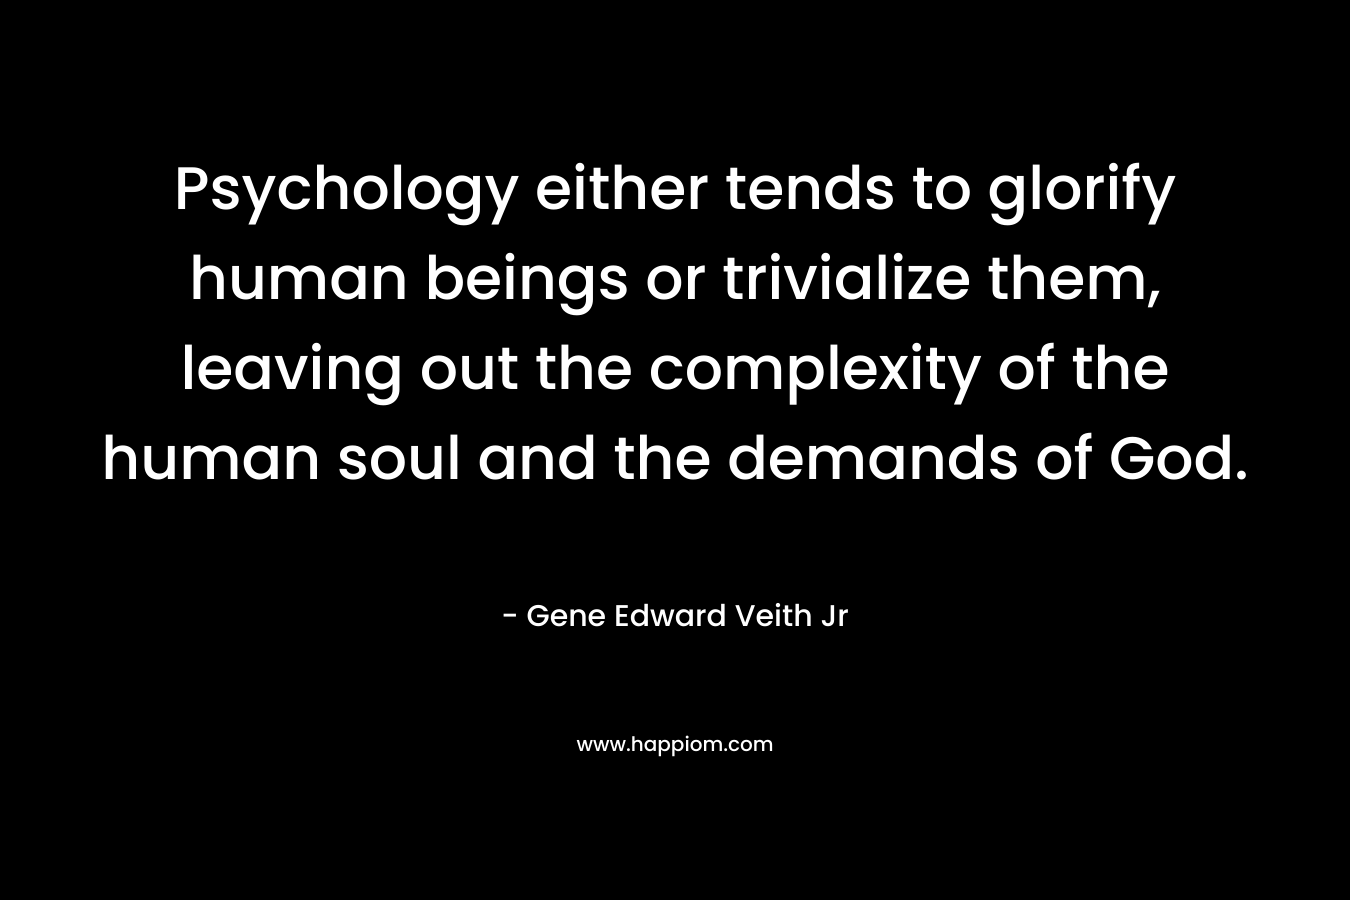 Psychology either tends to glorify human beings or trivialize them, leaving out the complexity of the human soul and the demands of God.